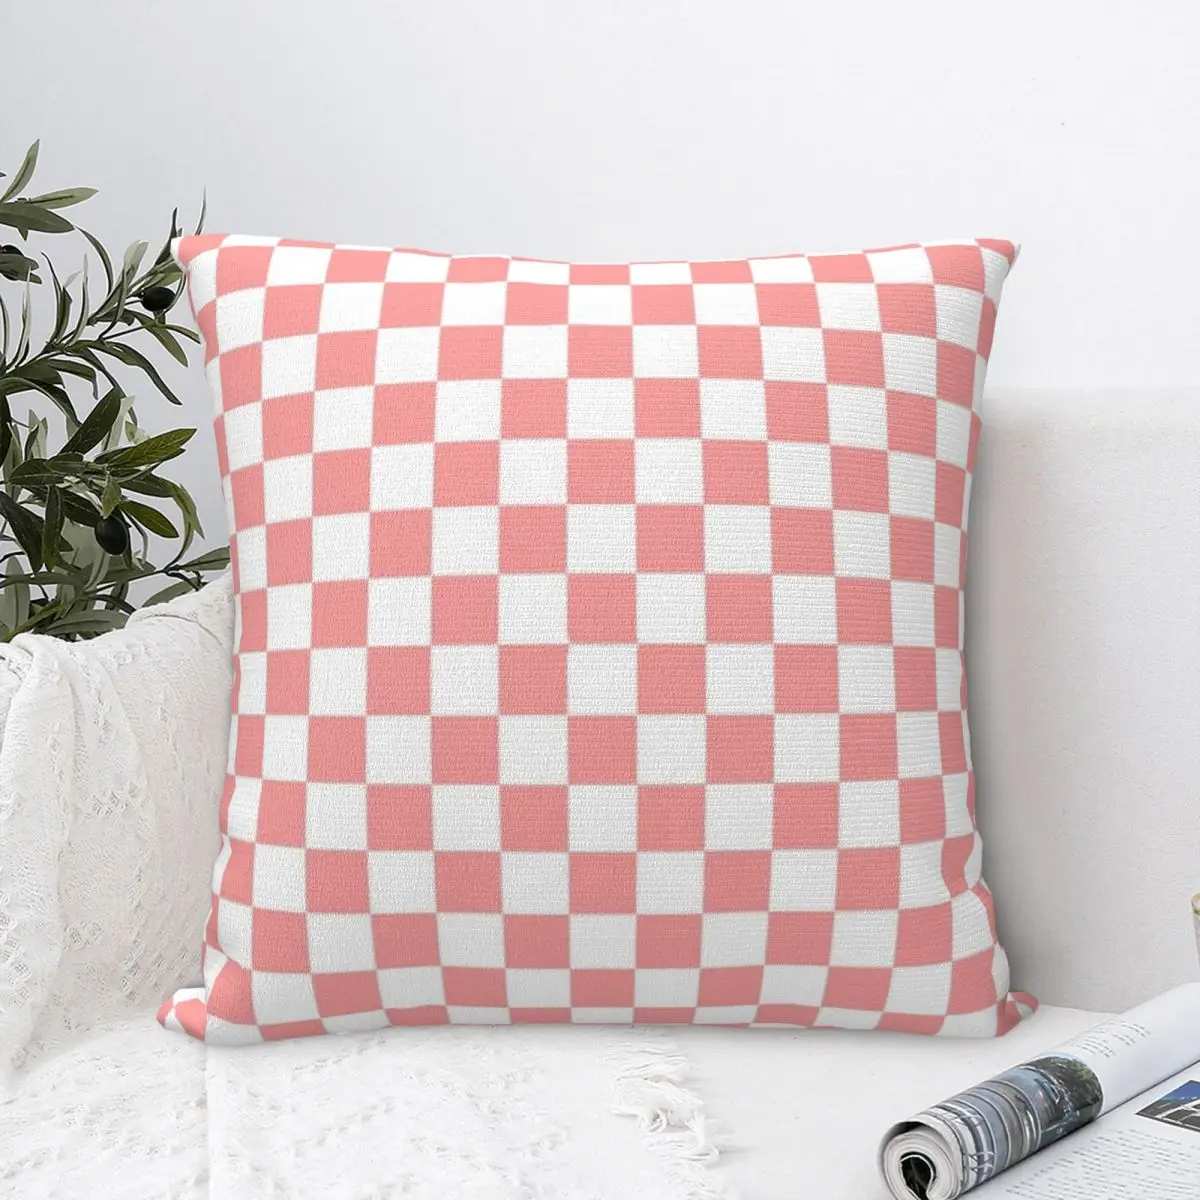 

Checkered Pattern Pastel Pink X White Square Pillowcase Polyester Pillow Cover Velvet Cushion Decorative Comfort Throw Pillow